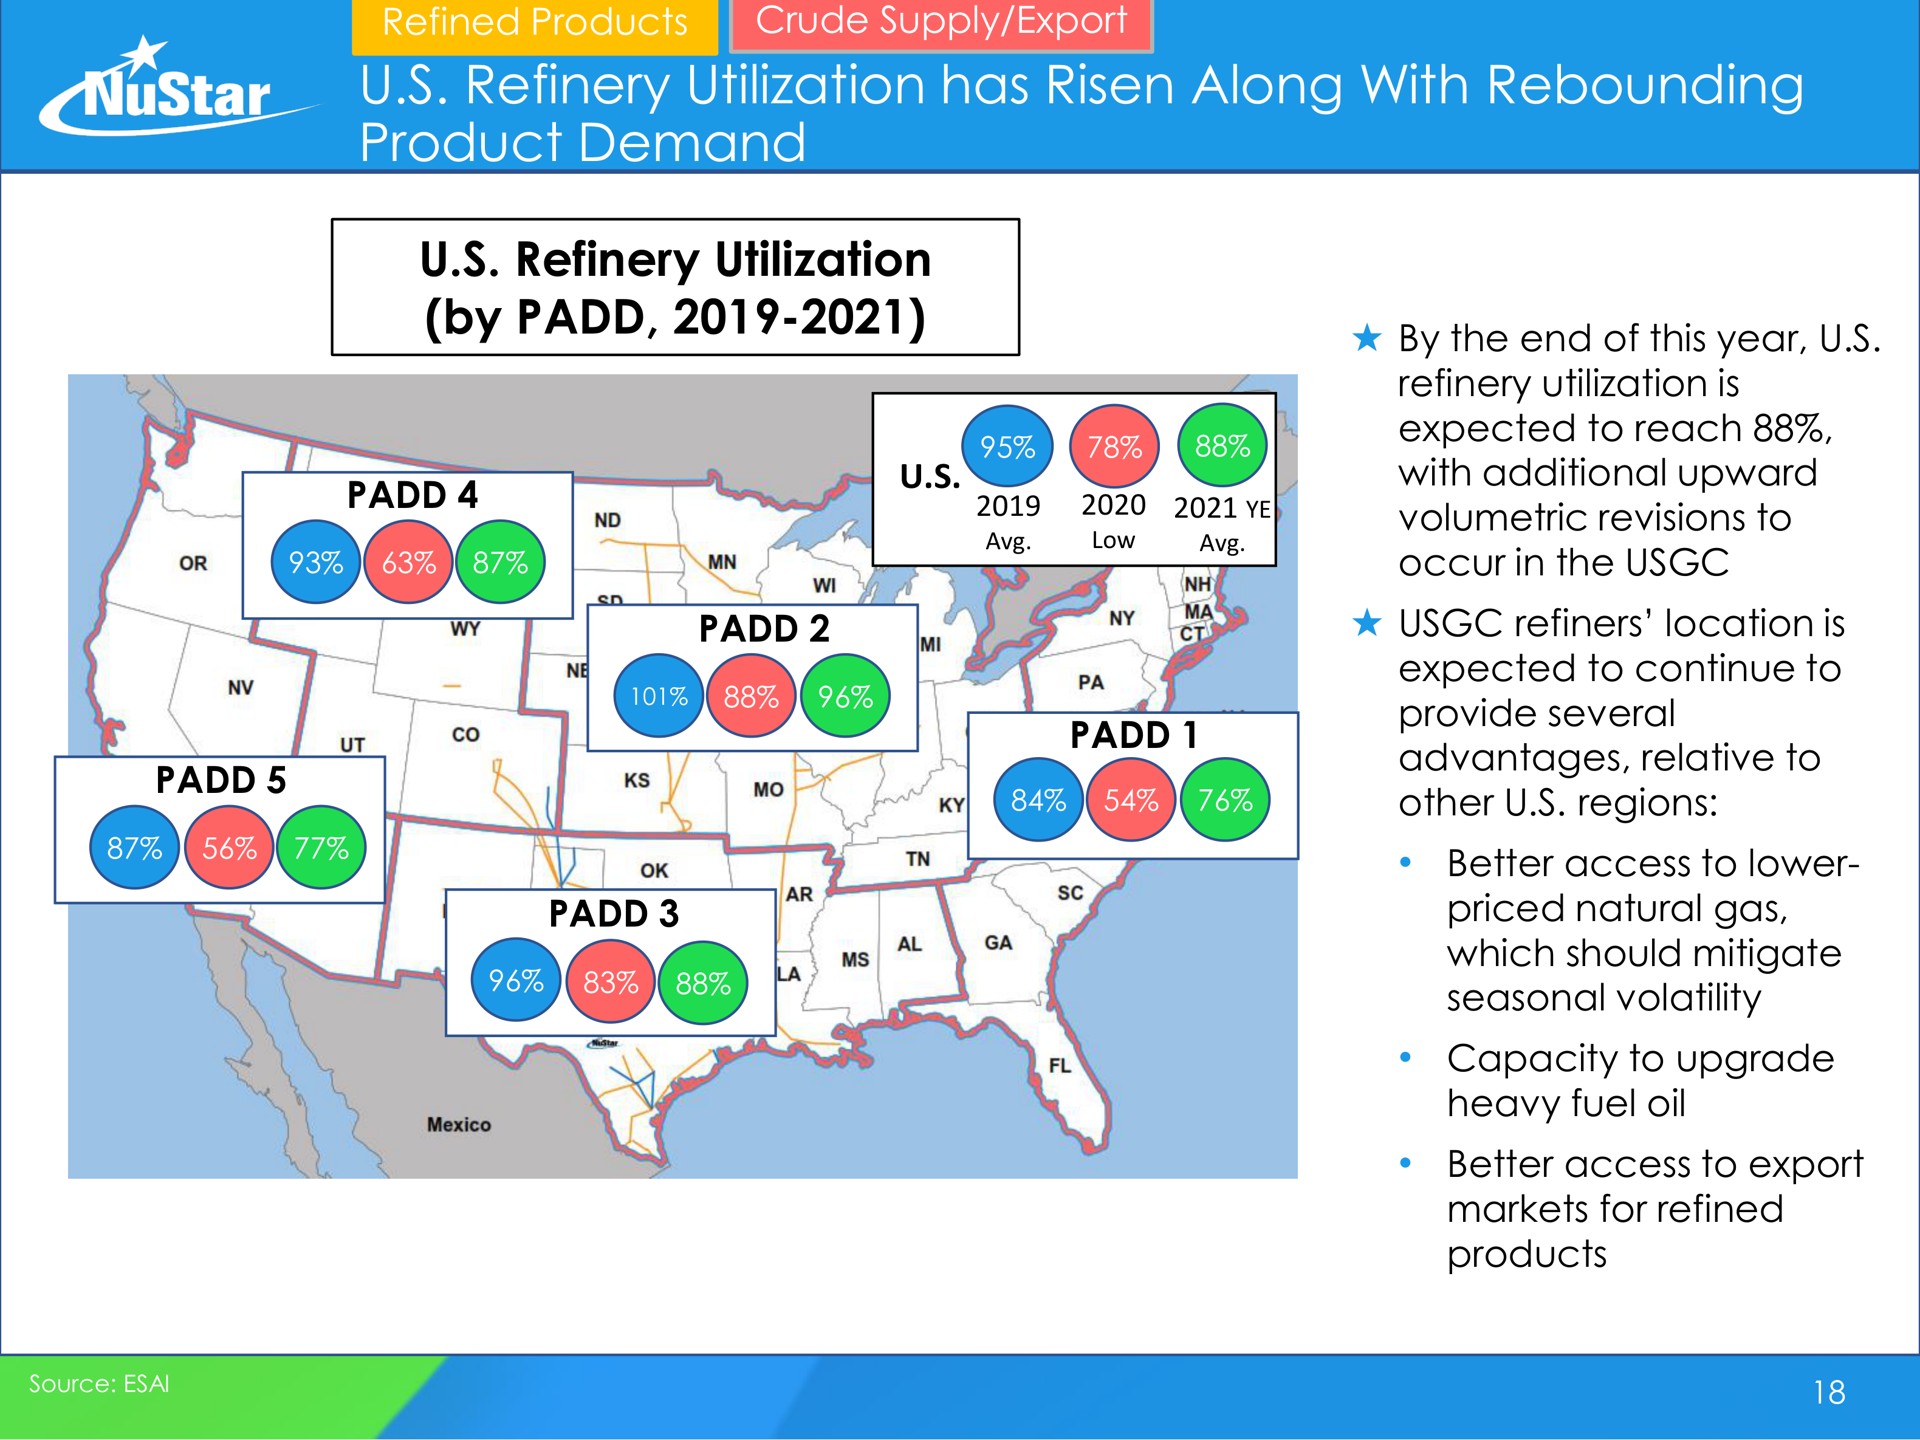 refinery utilization has risen along with rebounding product demand refinery utilization by other regions | NuStar Energy